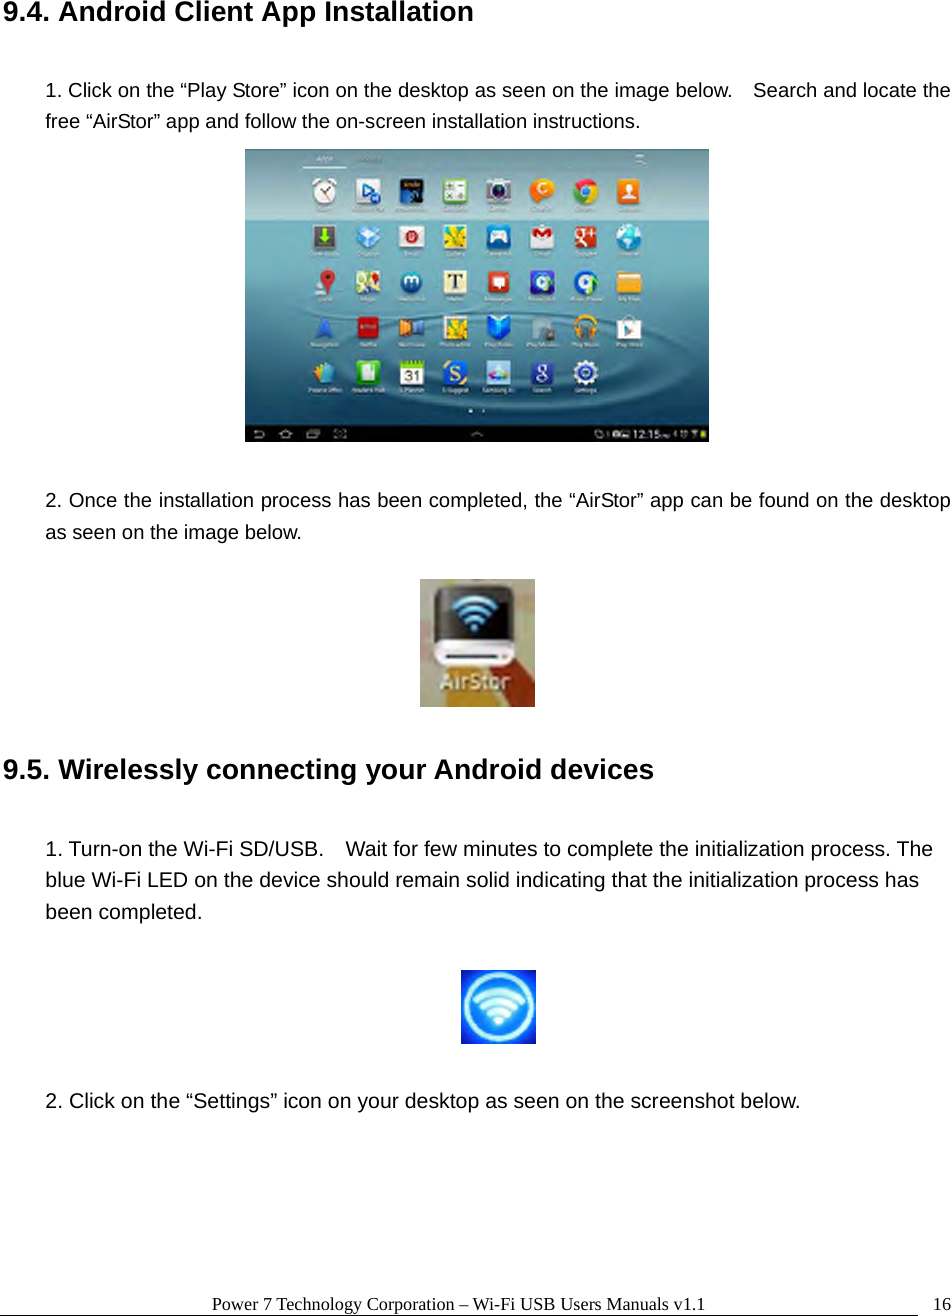 Power 7 Technology Corporation – Wi-Fi USB Users Manuals v1.1  169.4. Android Client App Installation  1. Click on the “Play Store” icon on the desktop as seen on the image below.    Search and locate the free “AirStor” app and follow the on-screen installation instructions.   2. Once the installation process has been completed, the “AirStor” app can be found on the desktop as seen on the image below.    9.5. Wirelessly connecting your Android devices  1. Turn-on the Wi-Fi SD/USB.    Wait for few minutes to complete the initialization process. The blue Wi-Fi LED on the device should remain solid indicating that the initialization process has been completed.    2. Click on the “Settings” icon on your desktop as seen on the screenshot below.  